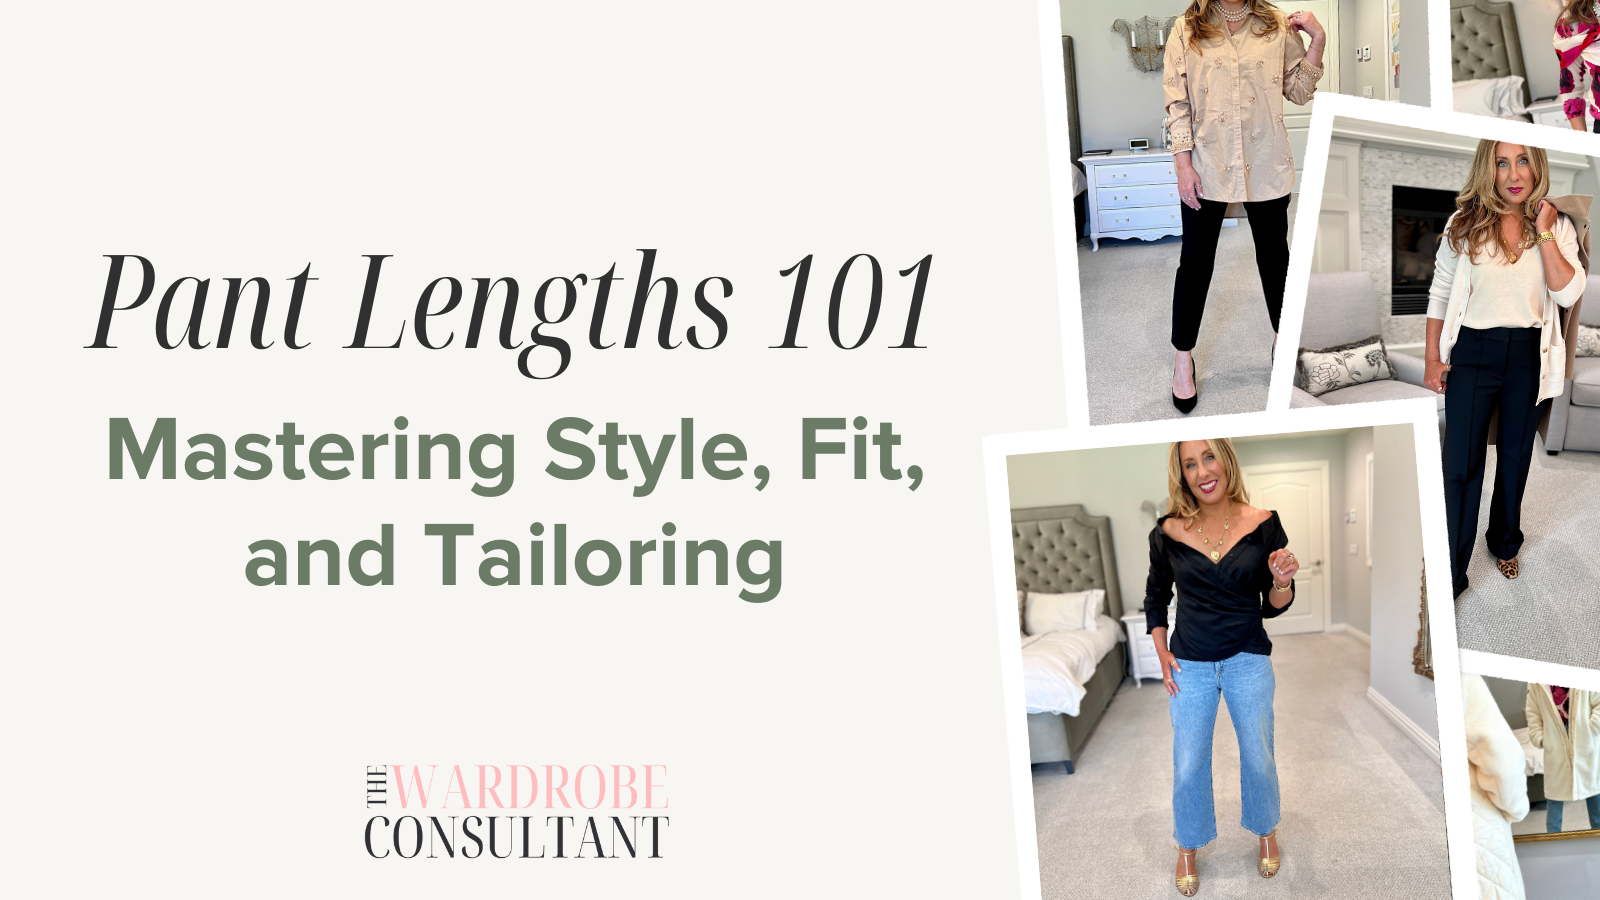 How To Style Wide Leg Cropped Pants - an indigo day